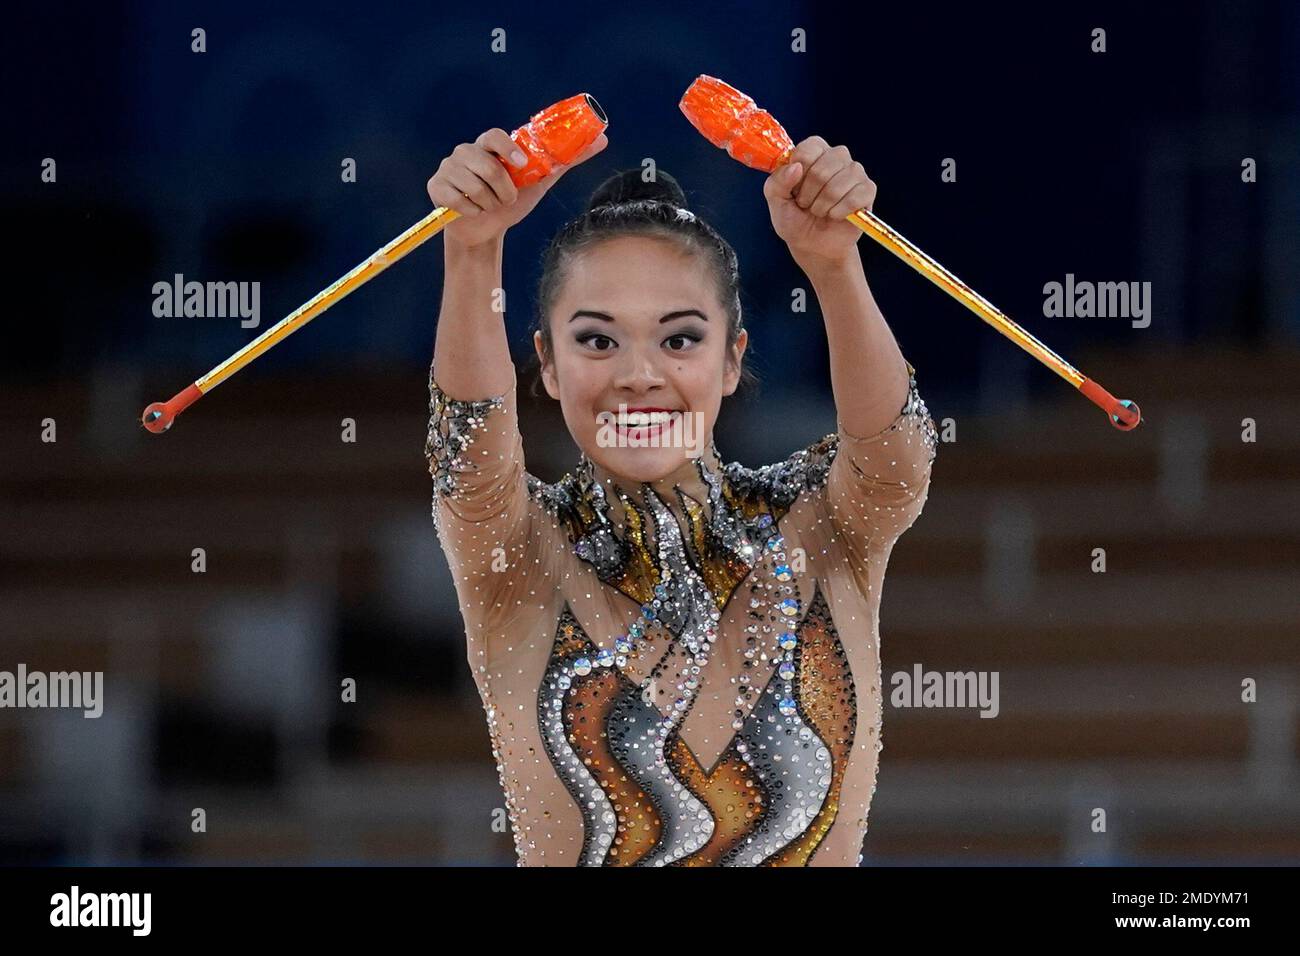 Laura Zeng, of United States, performs during the rhythmic gymnastics individual all-around qualifier at the 2020 Summer Olympics, Friday, Aug